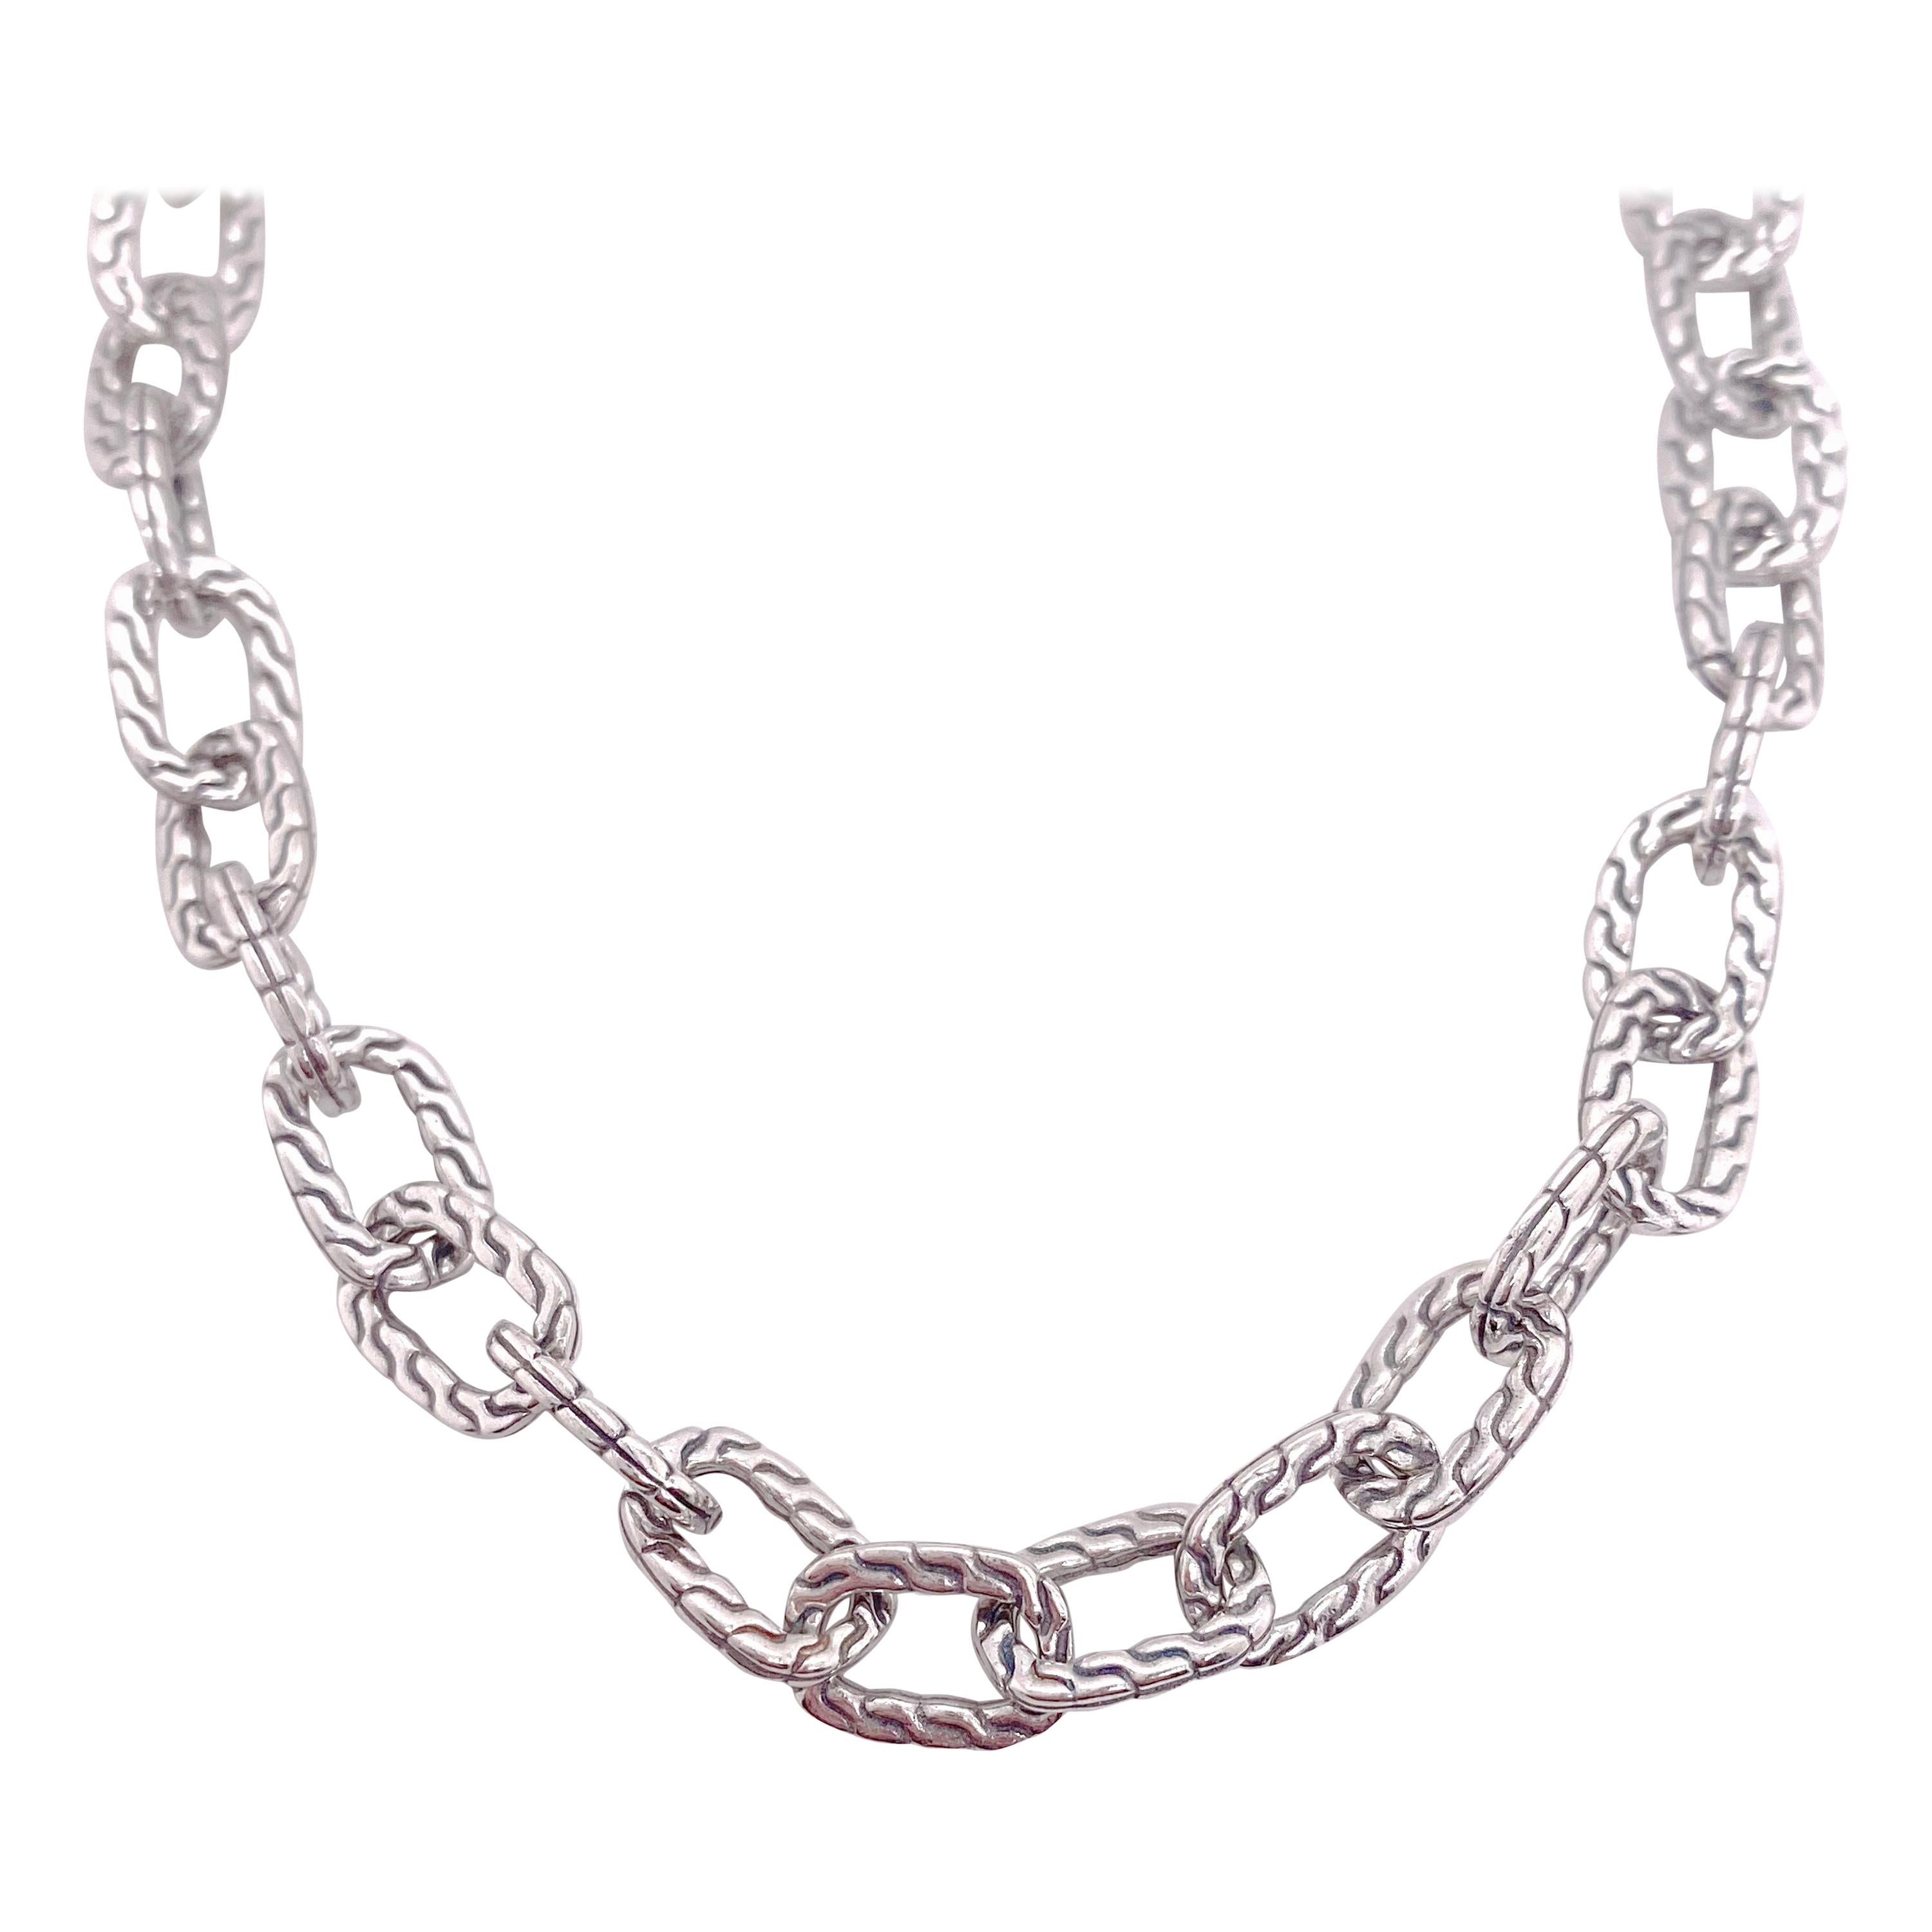 Chain Necklace in Sterling Silver w Designer Links, Heavy Chain